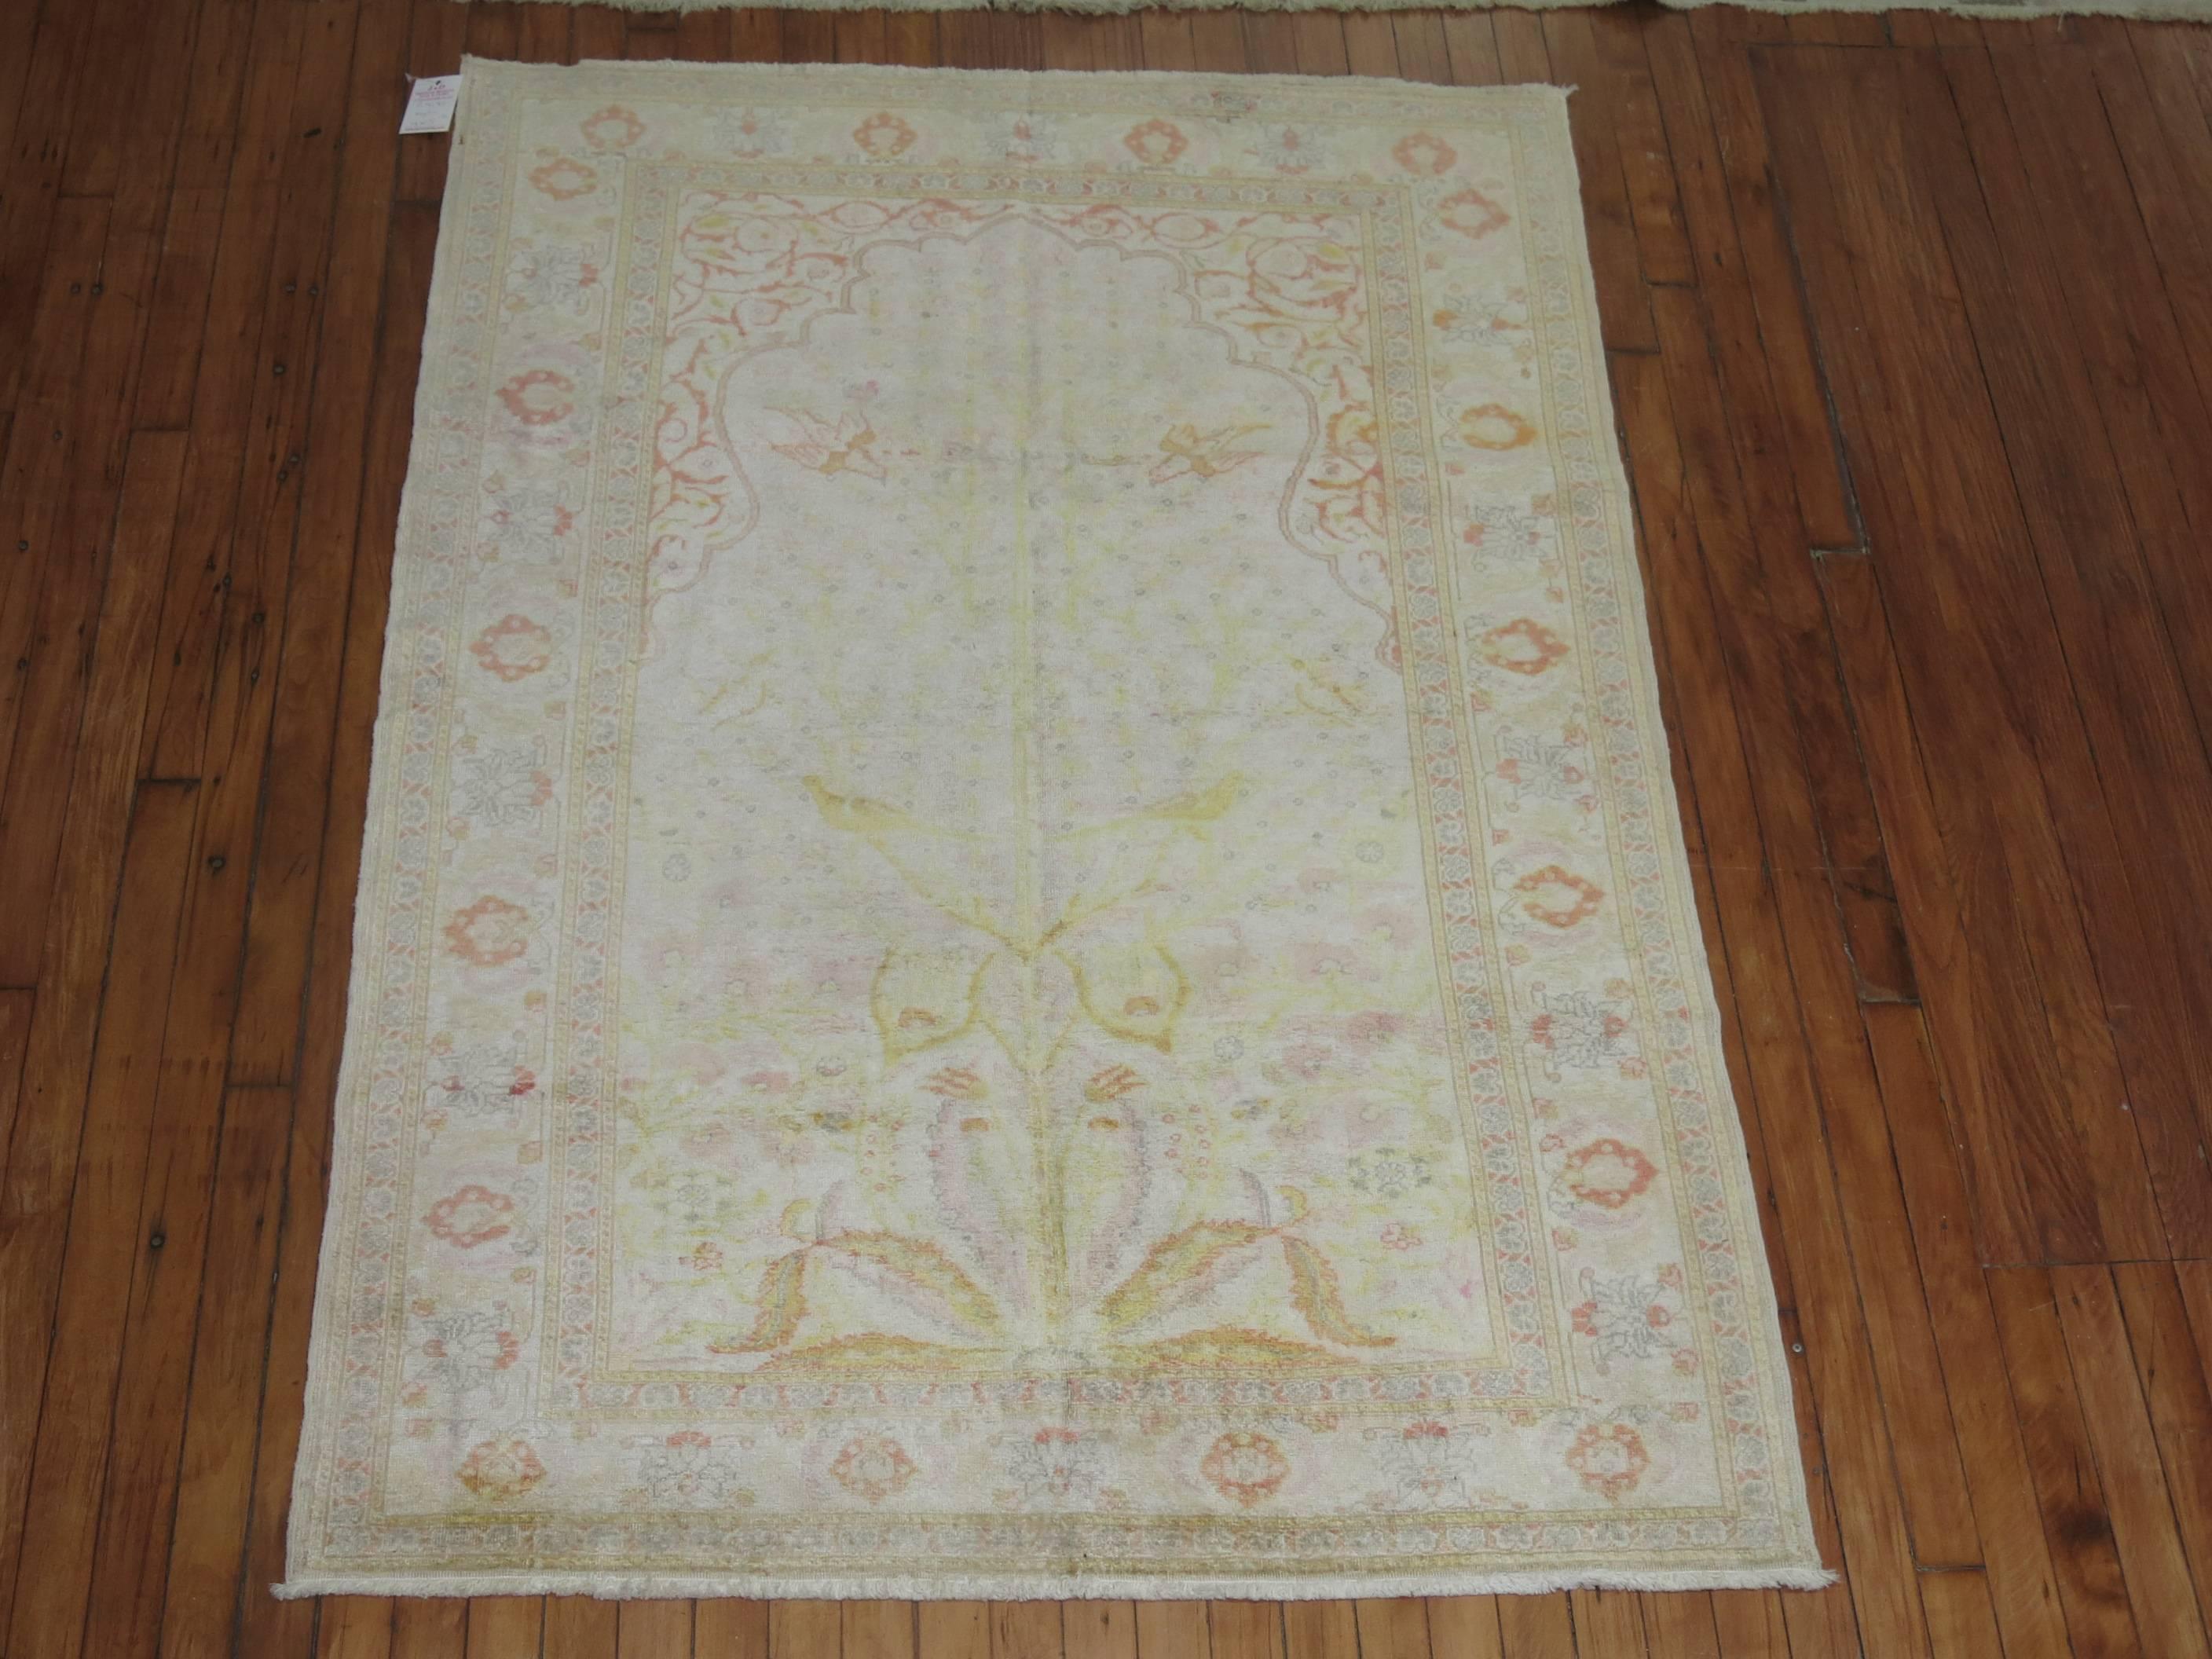 Vintage Turkish mercerized cotton Kayseri Prayer rug. Ivory field with yellow, orange and pink accents.